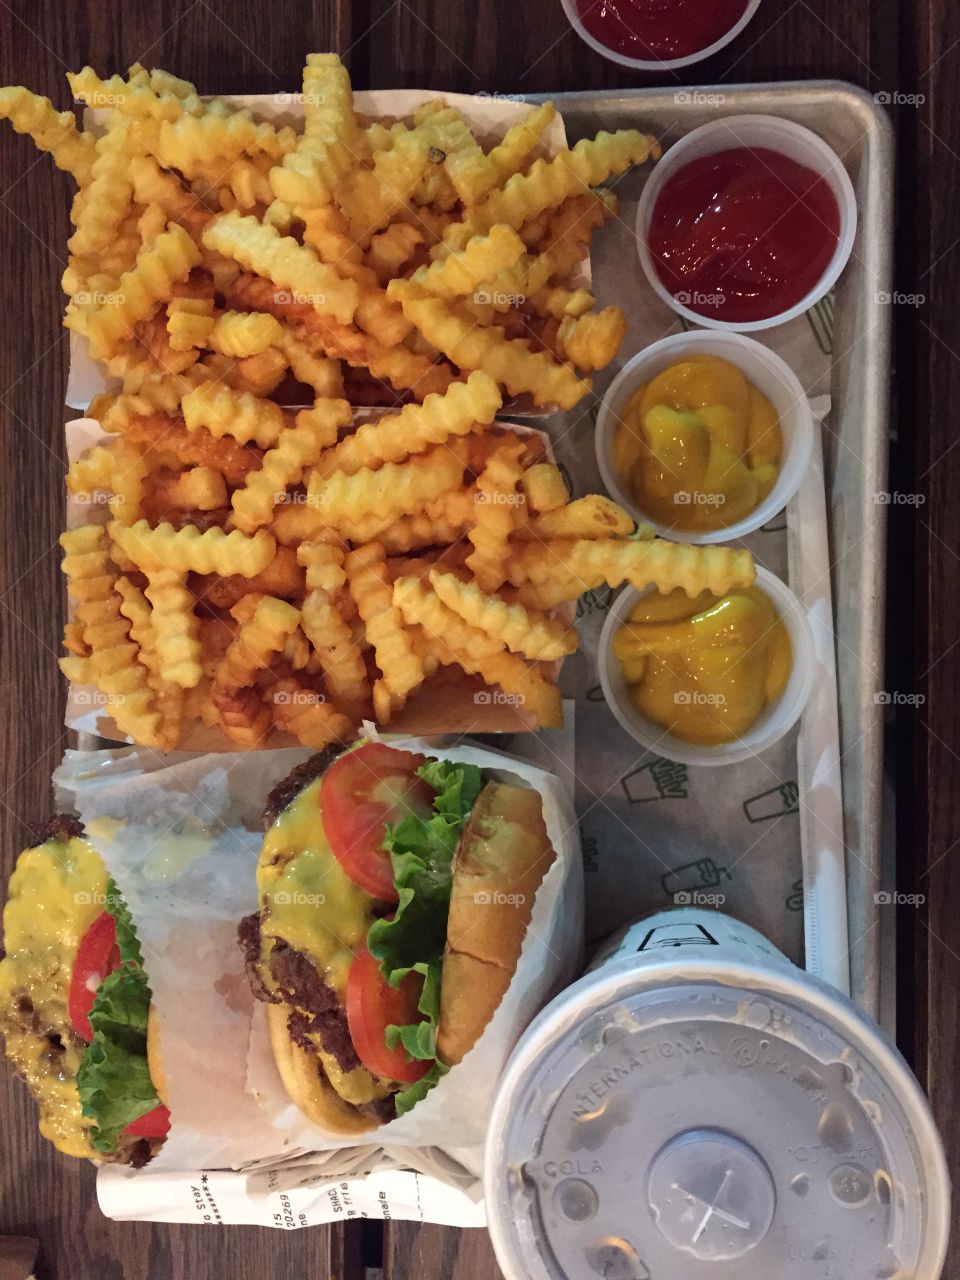 Juicy Burgers . Picture taken of a burger order from a restaurant. 